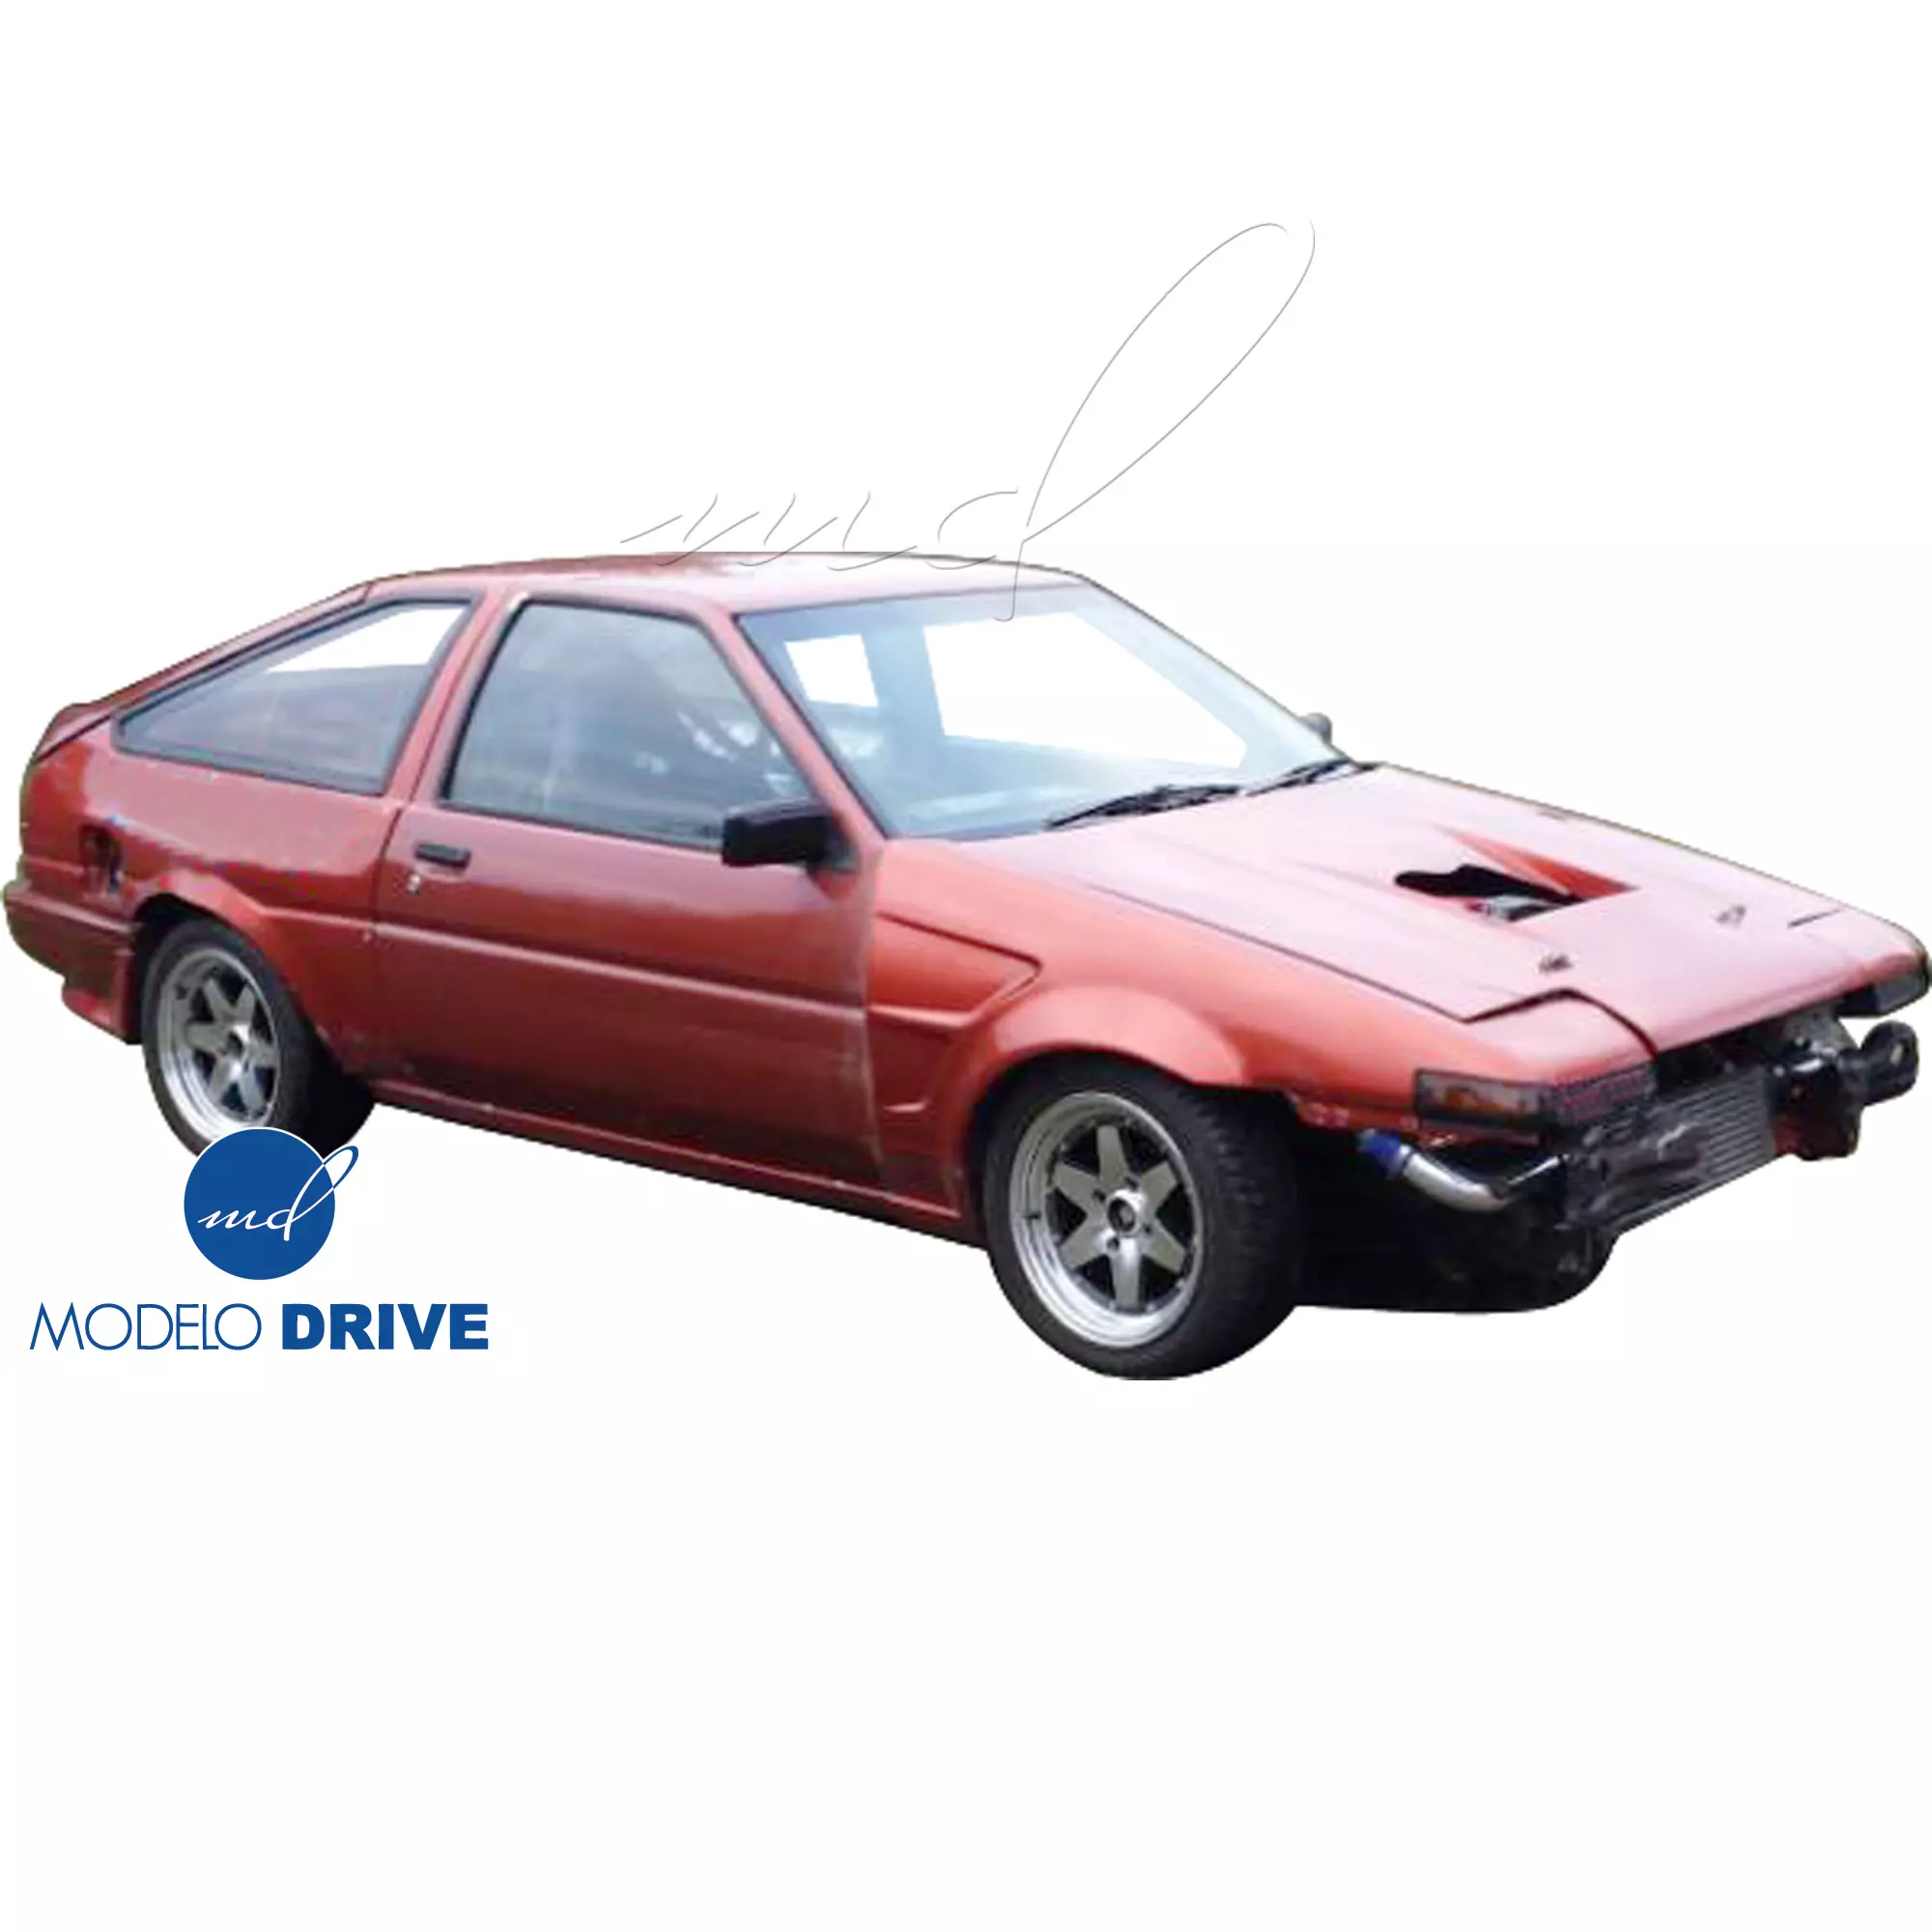 ModeloDrive FRP DMA D1 Wide Body 30mm Fenders (front) > Toyota Corolla AE86 1984-1987 > 2/3dr - Image 8